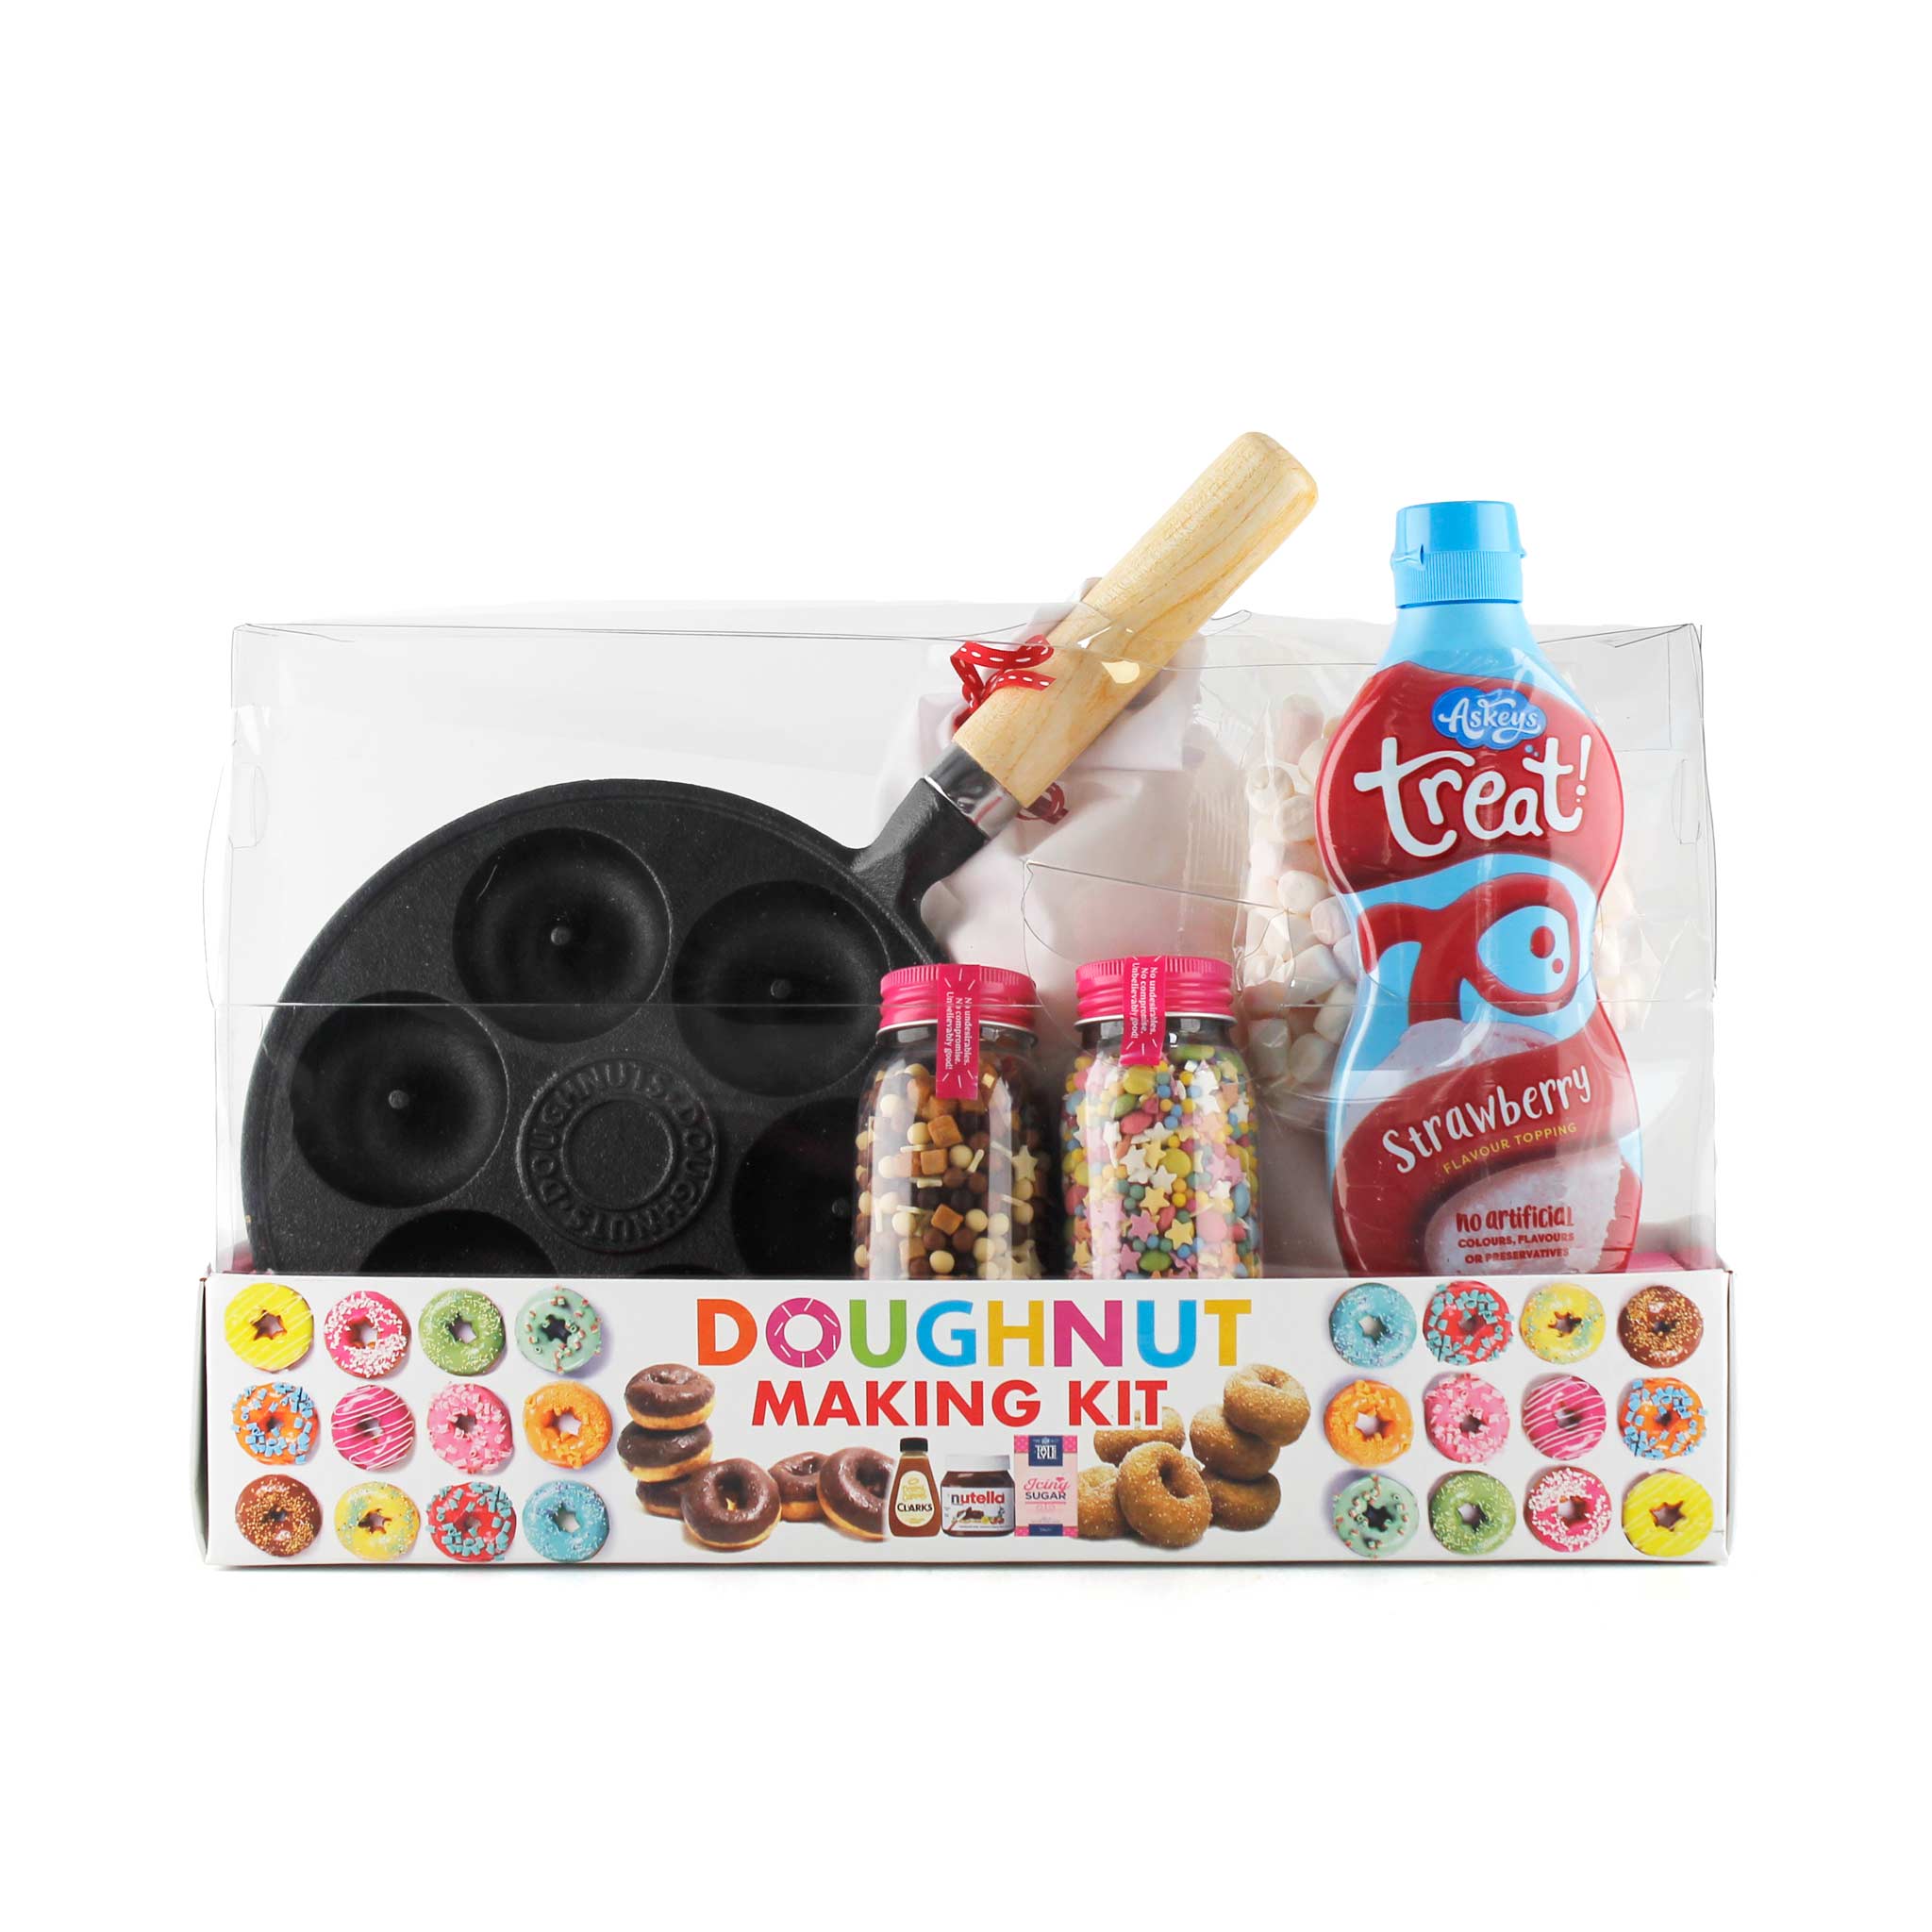 Donut making kit with strawberry sauce by China Blue